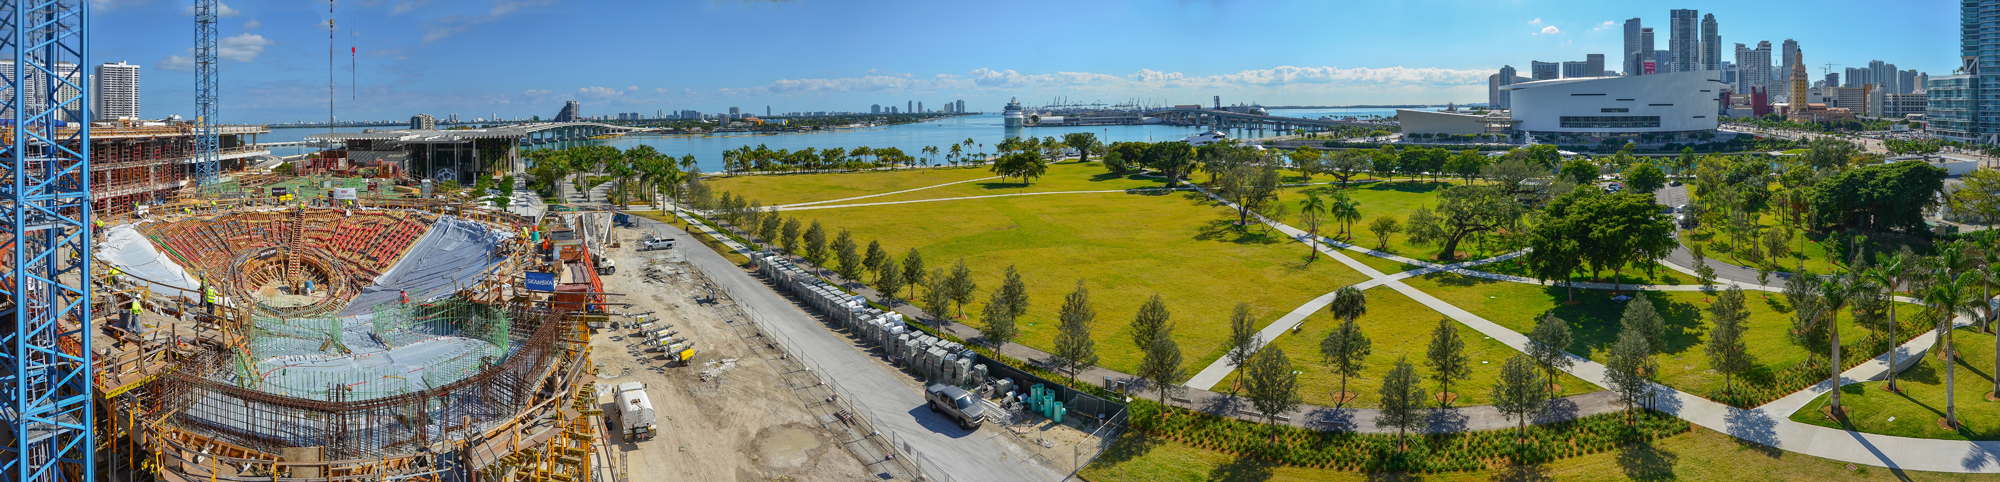 Panoramic photo of construction site and exterior land